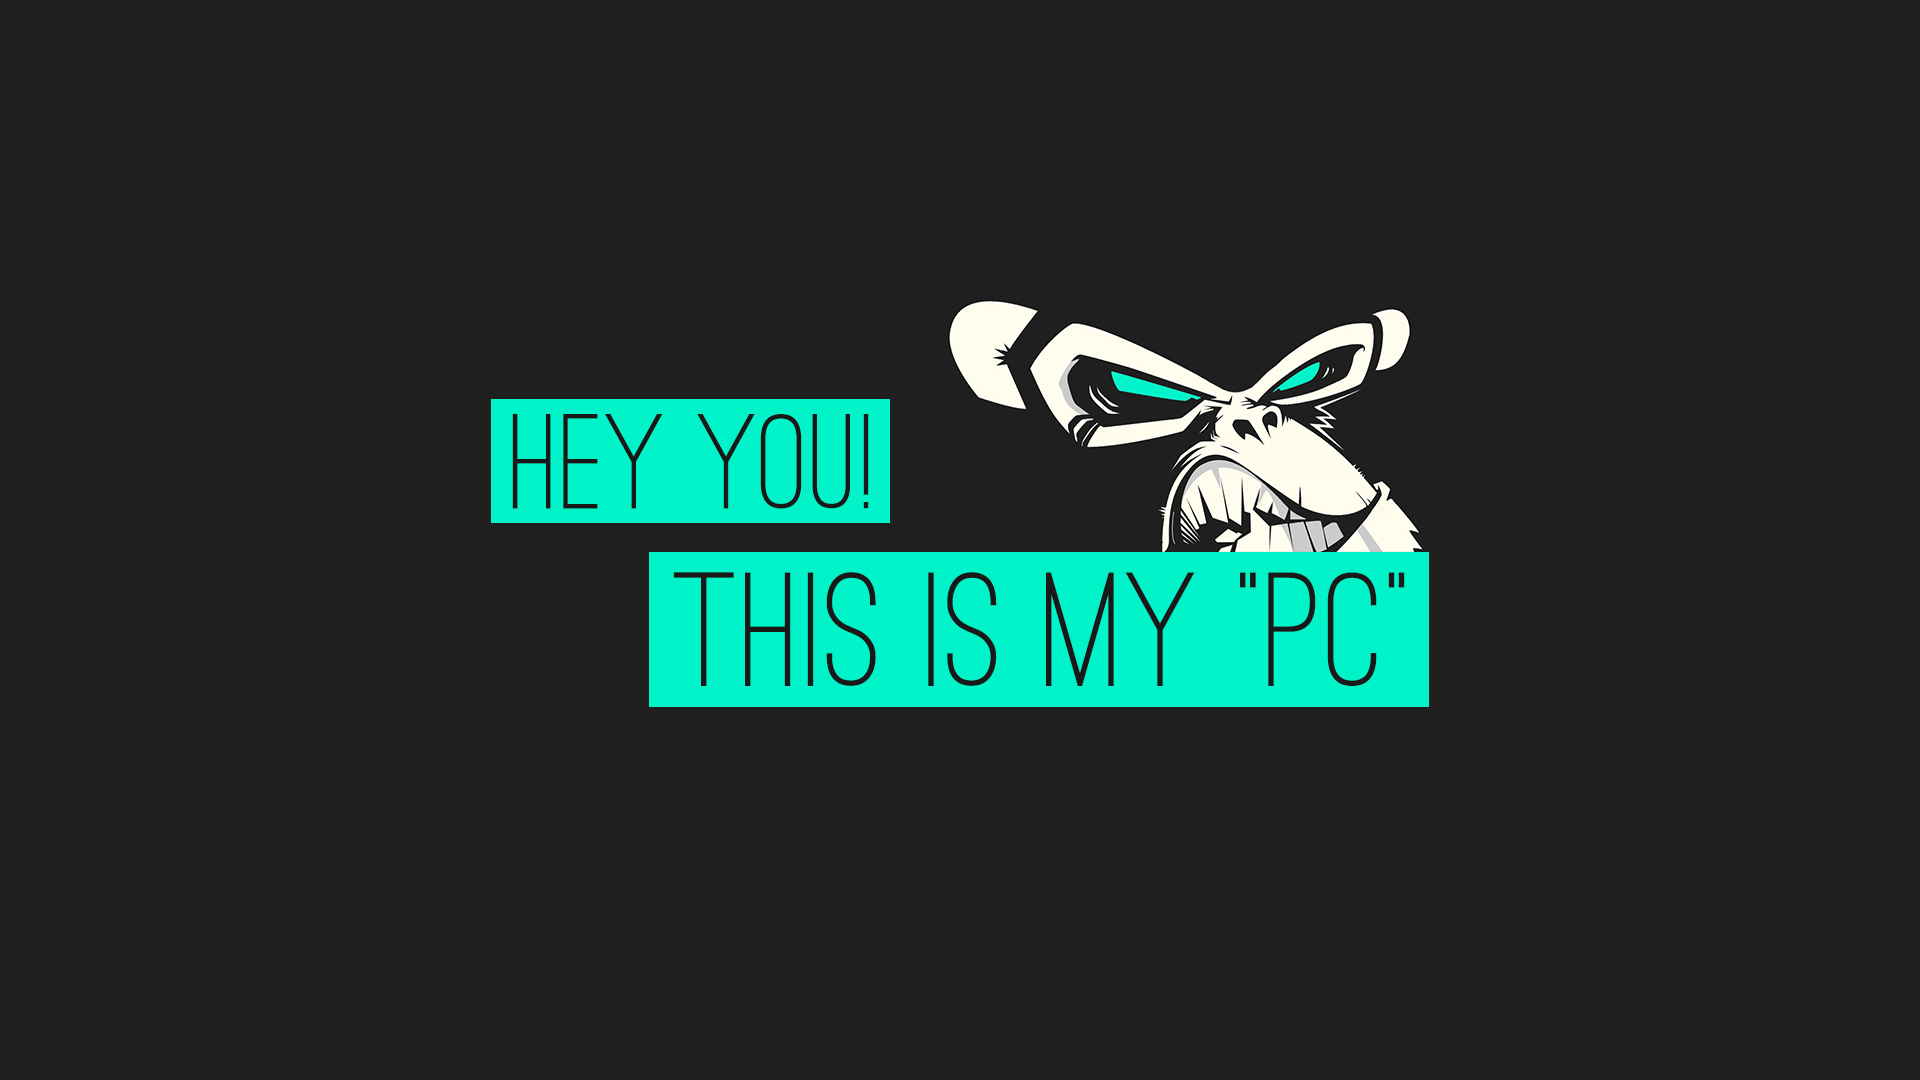 Hey You This Is My Pc - HD Wallpaper 